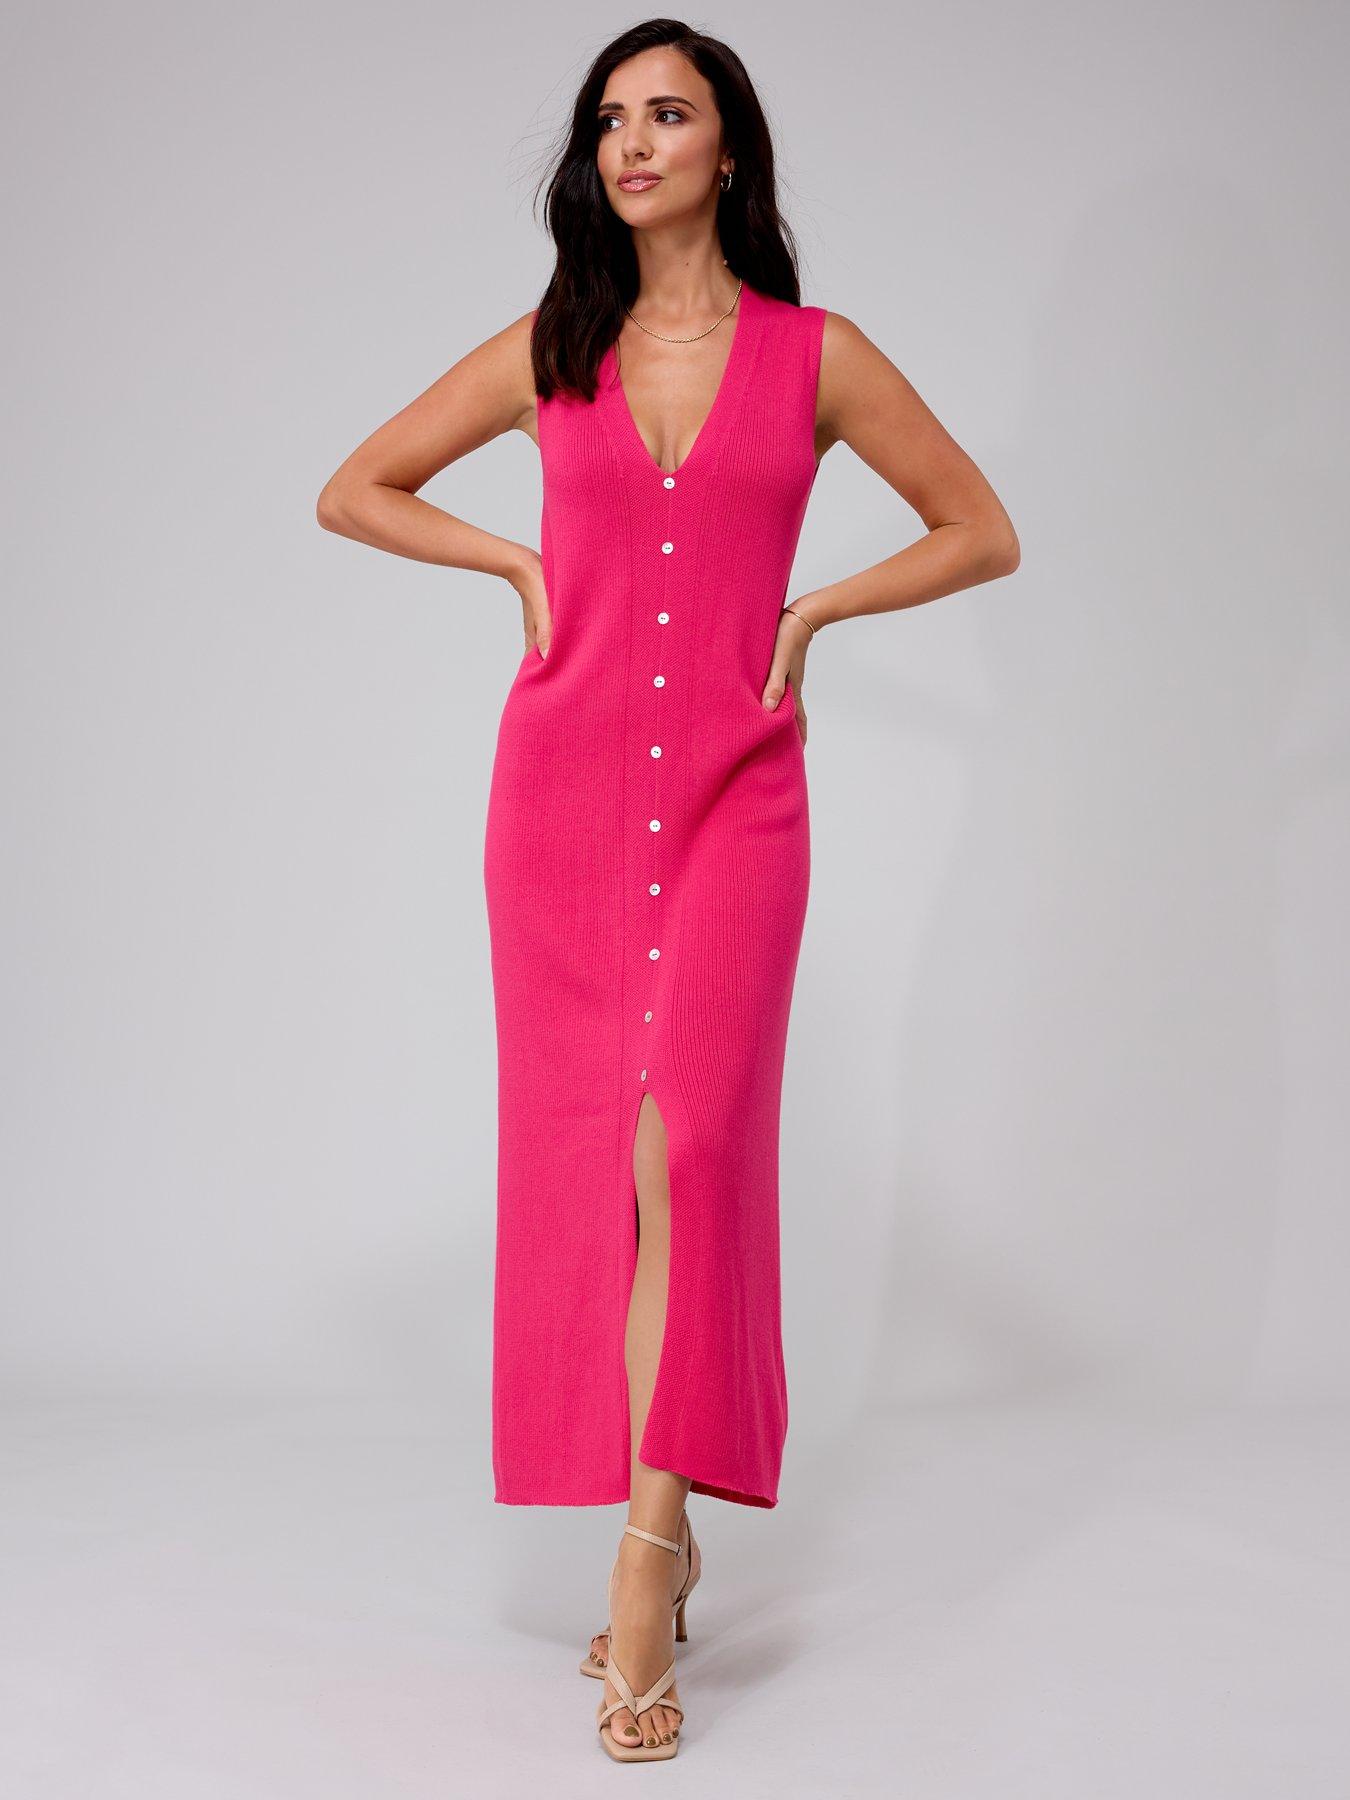 Lucy Mecklenburgh x V by Very Knitted Ribbed Sleeveless Button Down Midi  Dress - Pink